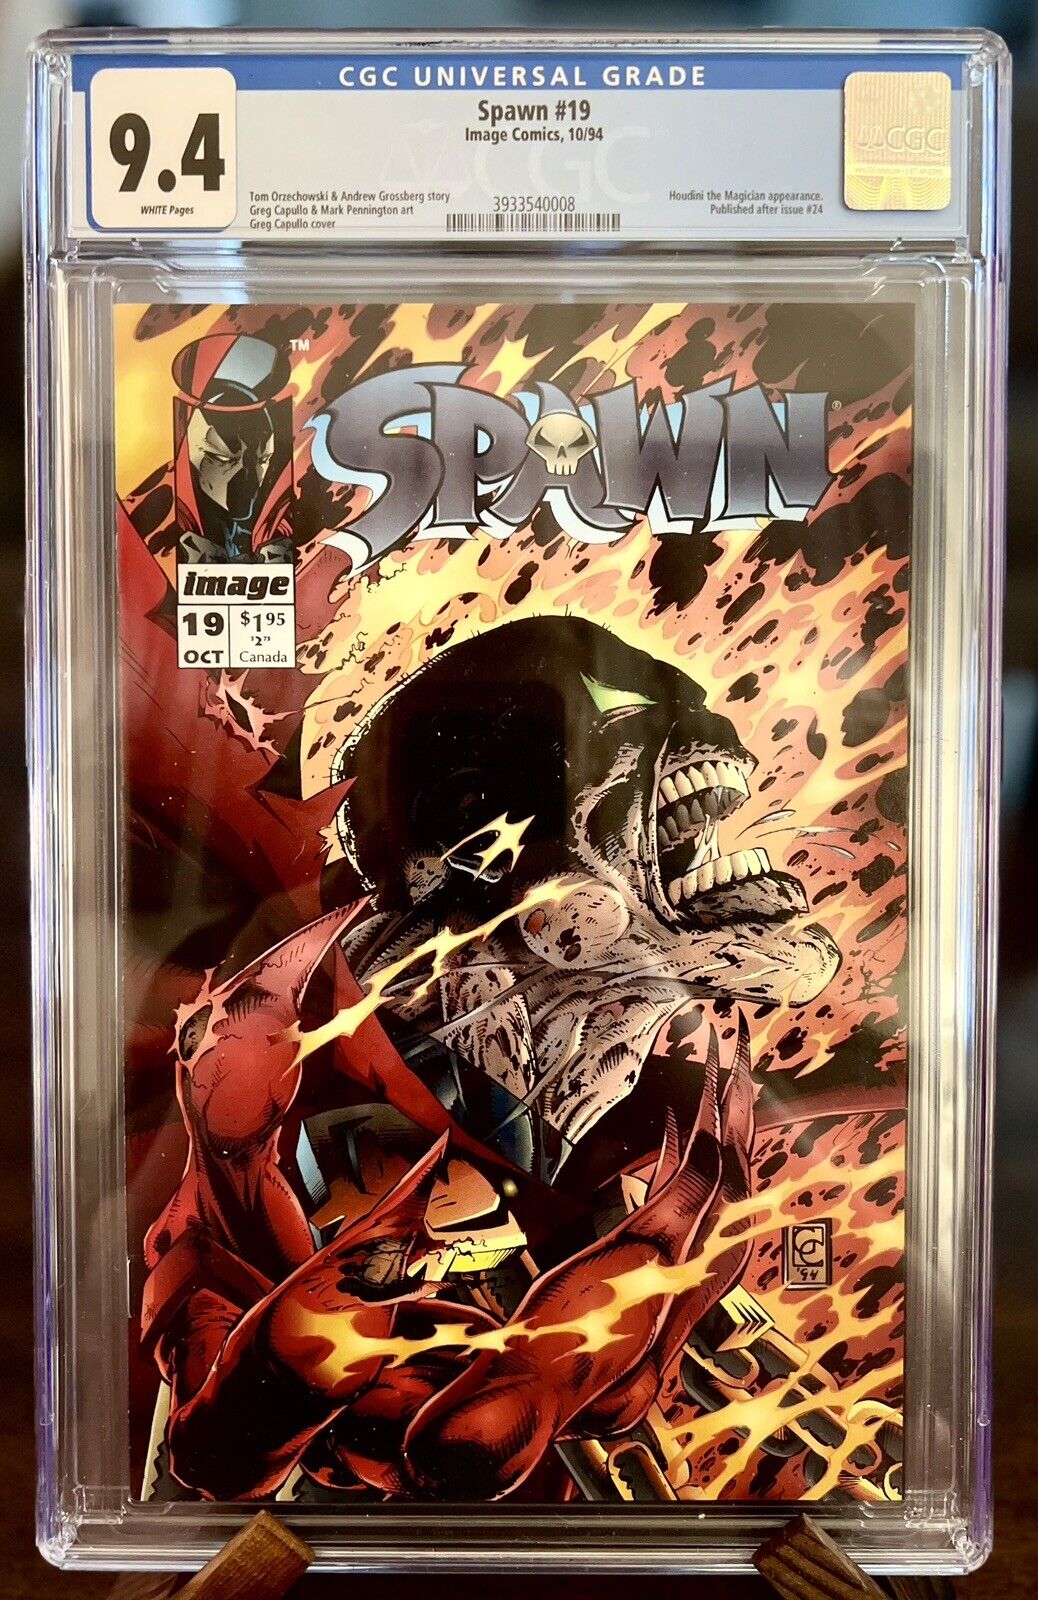 Spawn # 19 - CGC 9.4 with White Pages - Houdini App - Published after issue #24